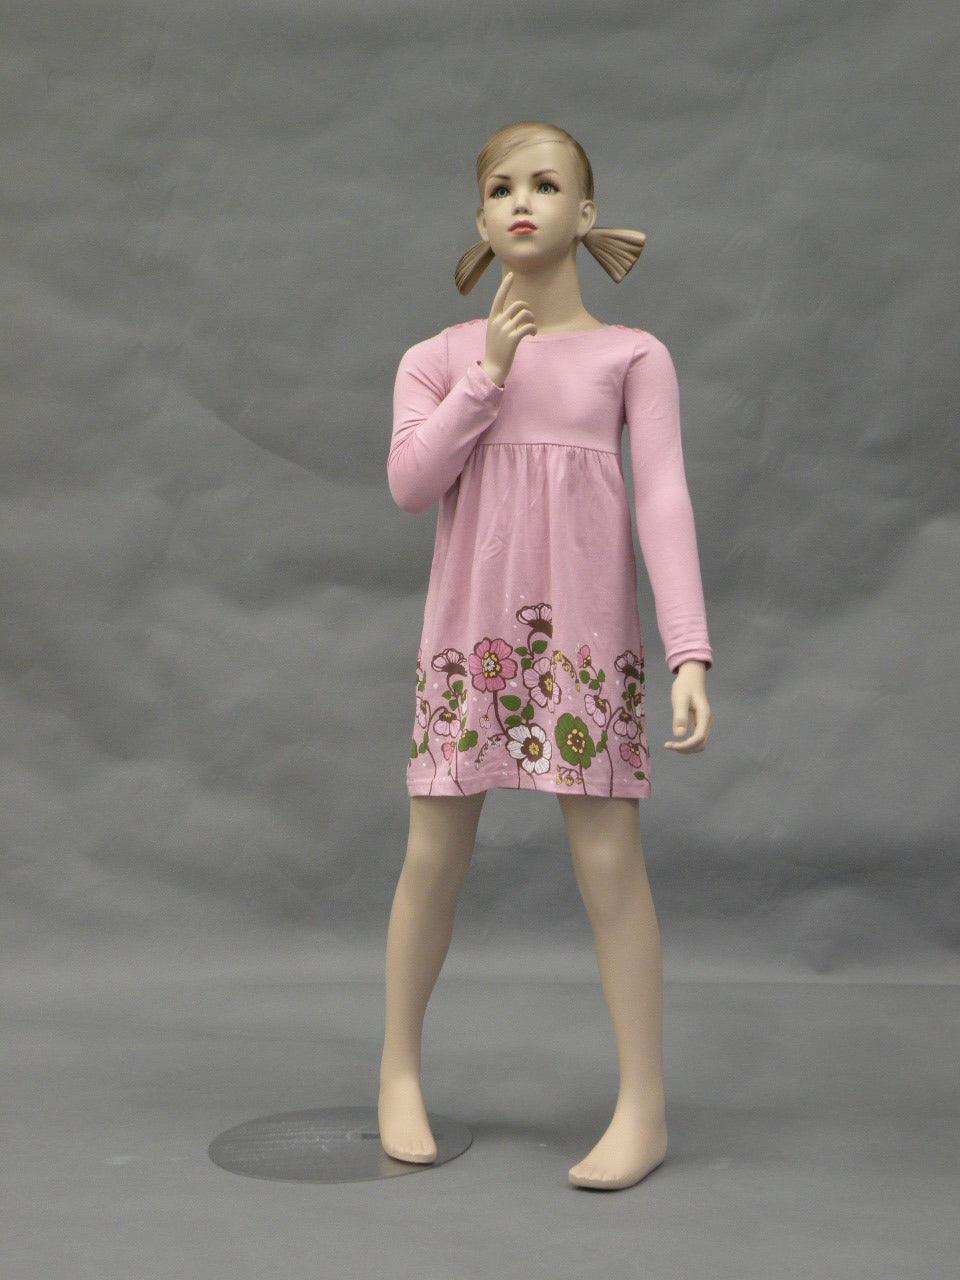 Realistic Child Mannequin MM-509F - Mannequin Mall